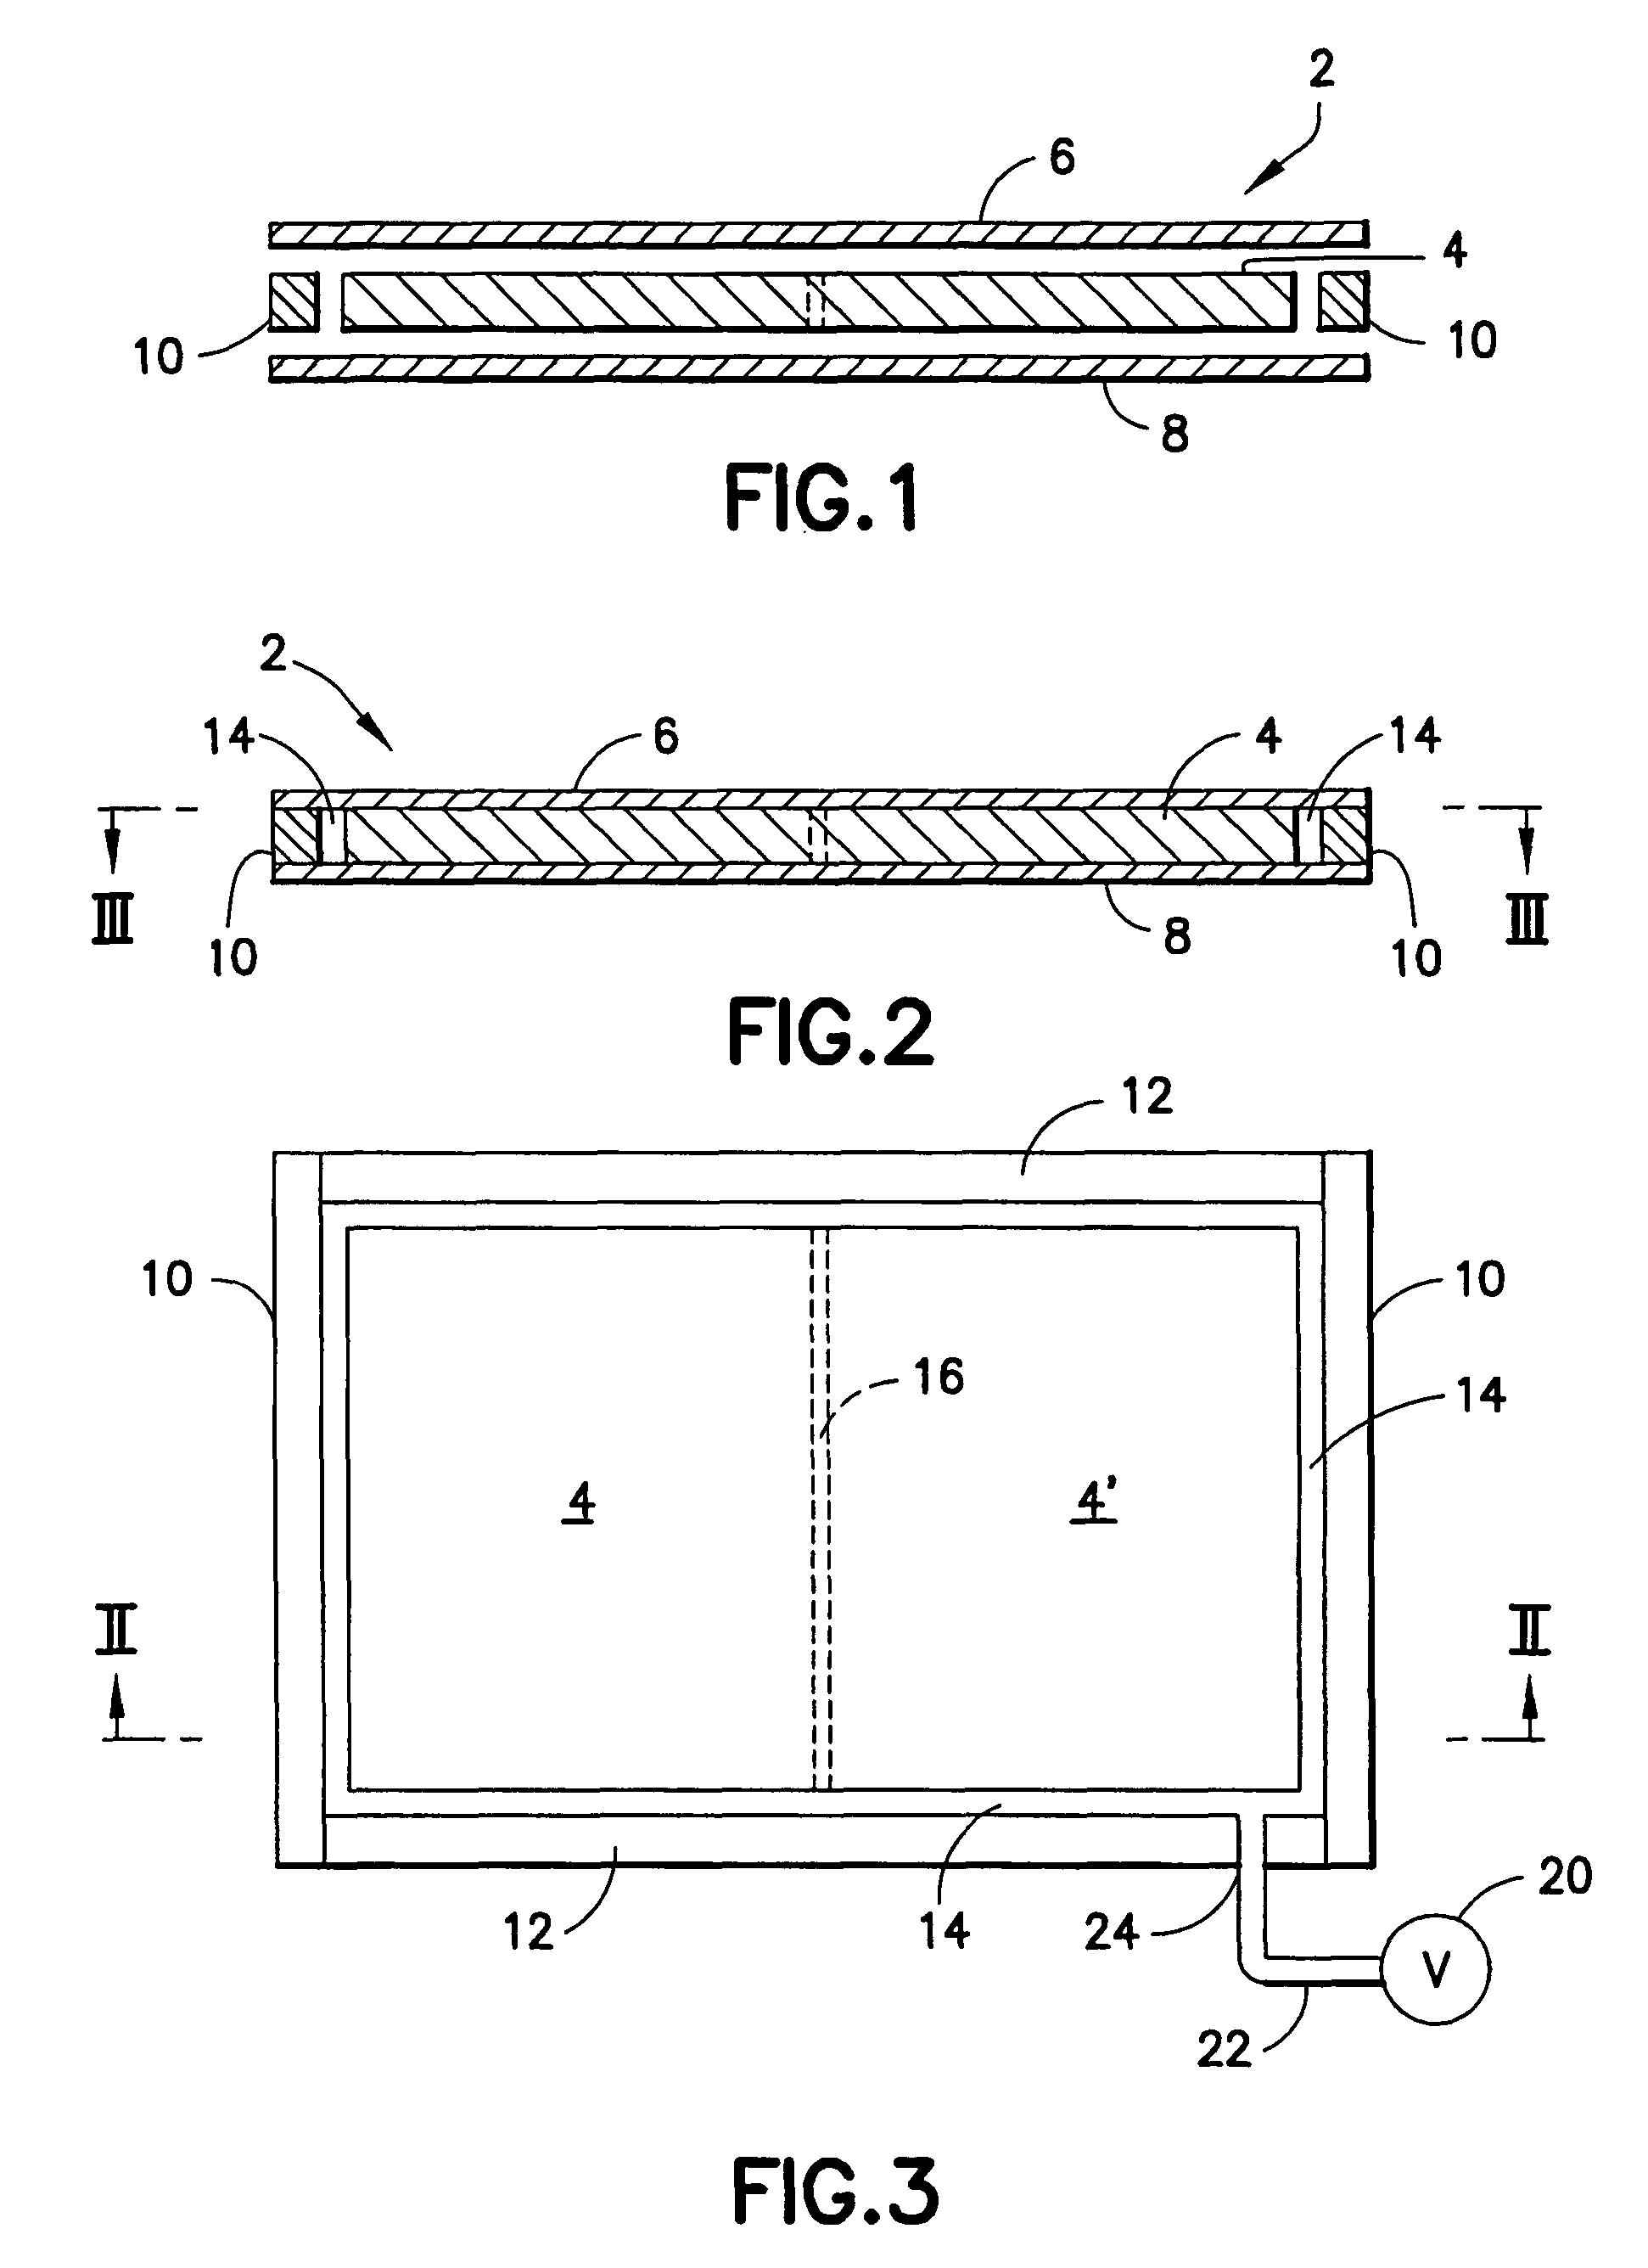 Griddle plate having a vacuum bonded cook surface